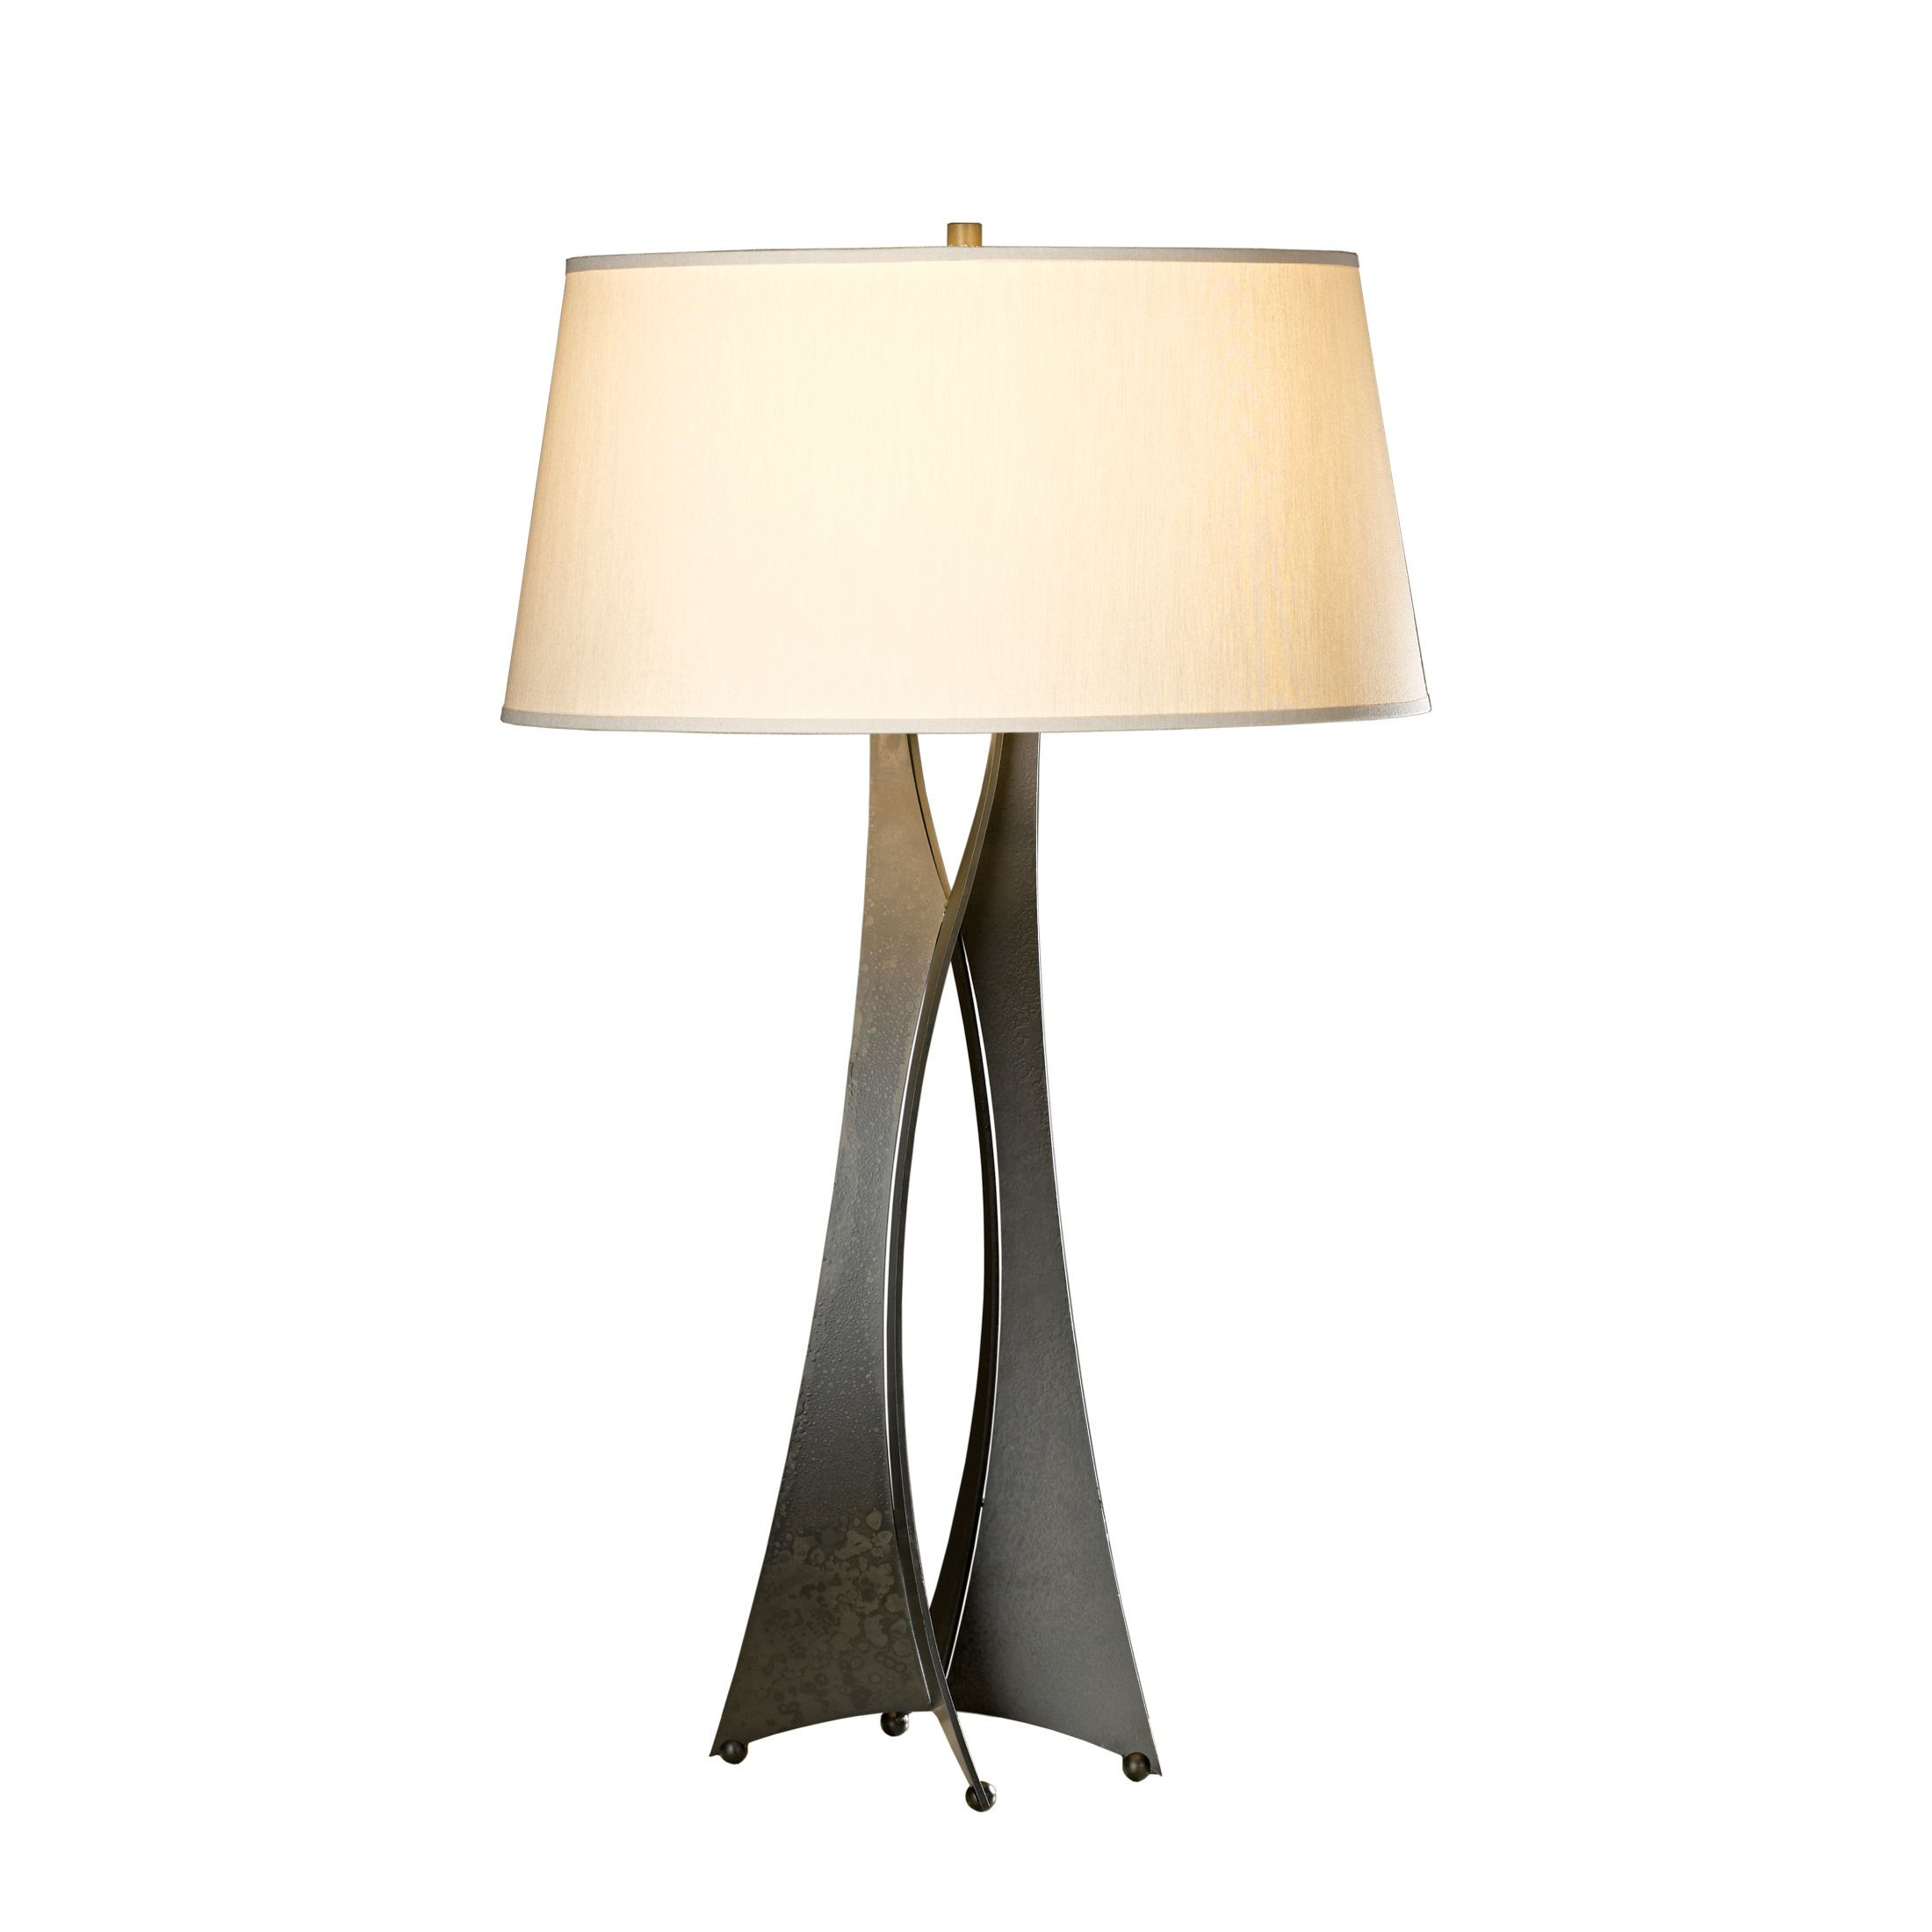 24 Stunning Tall Gold Metal Vase 2024 free download tall gold metal vase of gold table lamp base fresh how to make a table lamp 10h vases from intended for gold table lamp base fresh moreau tall table lamp hubbardton forge of gold table lamp